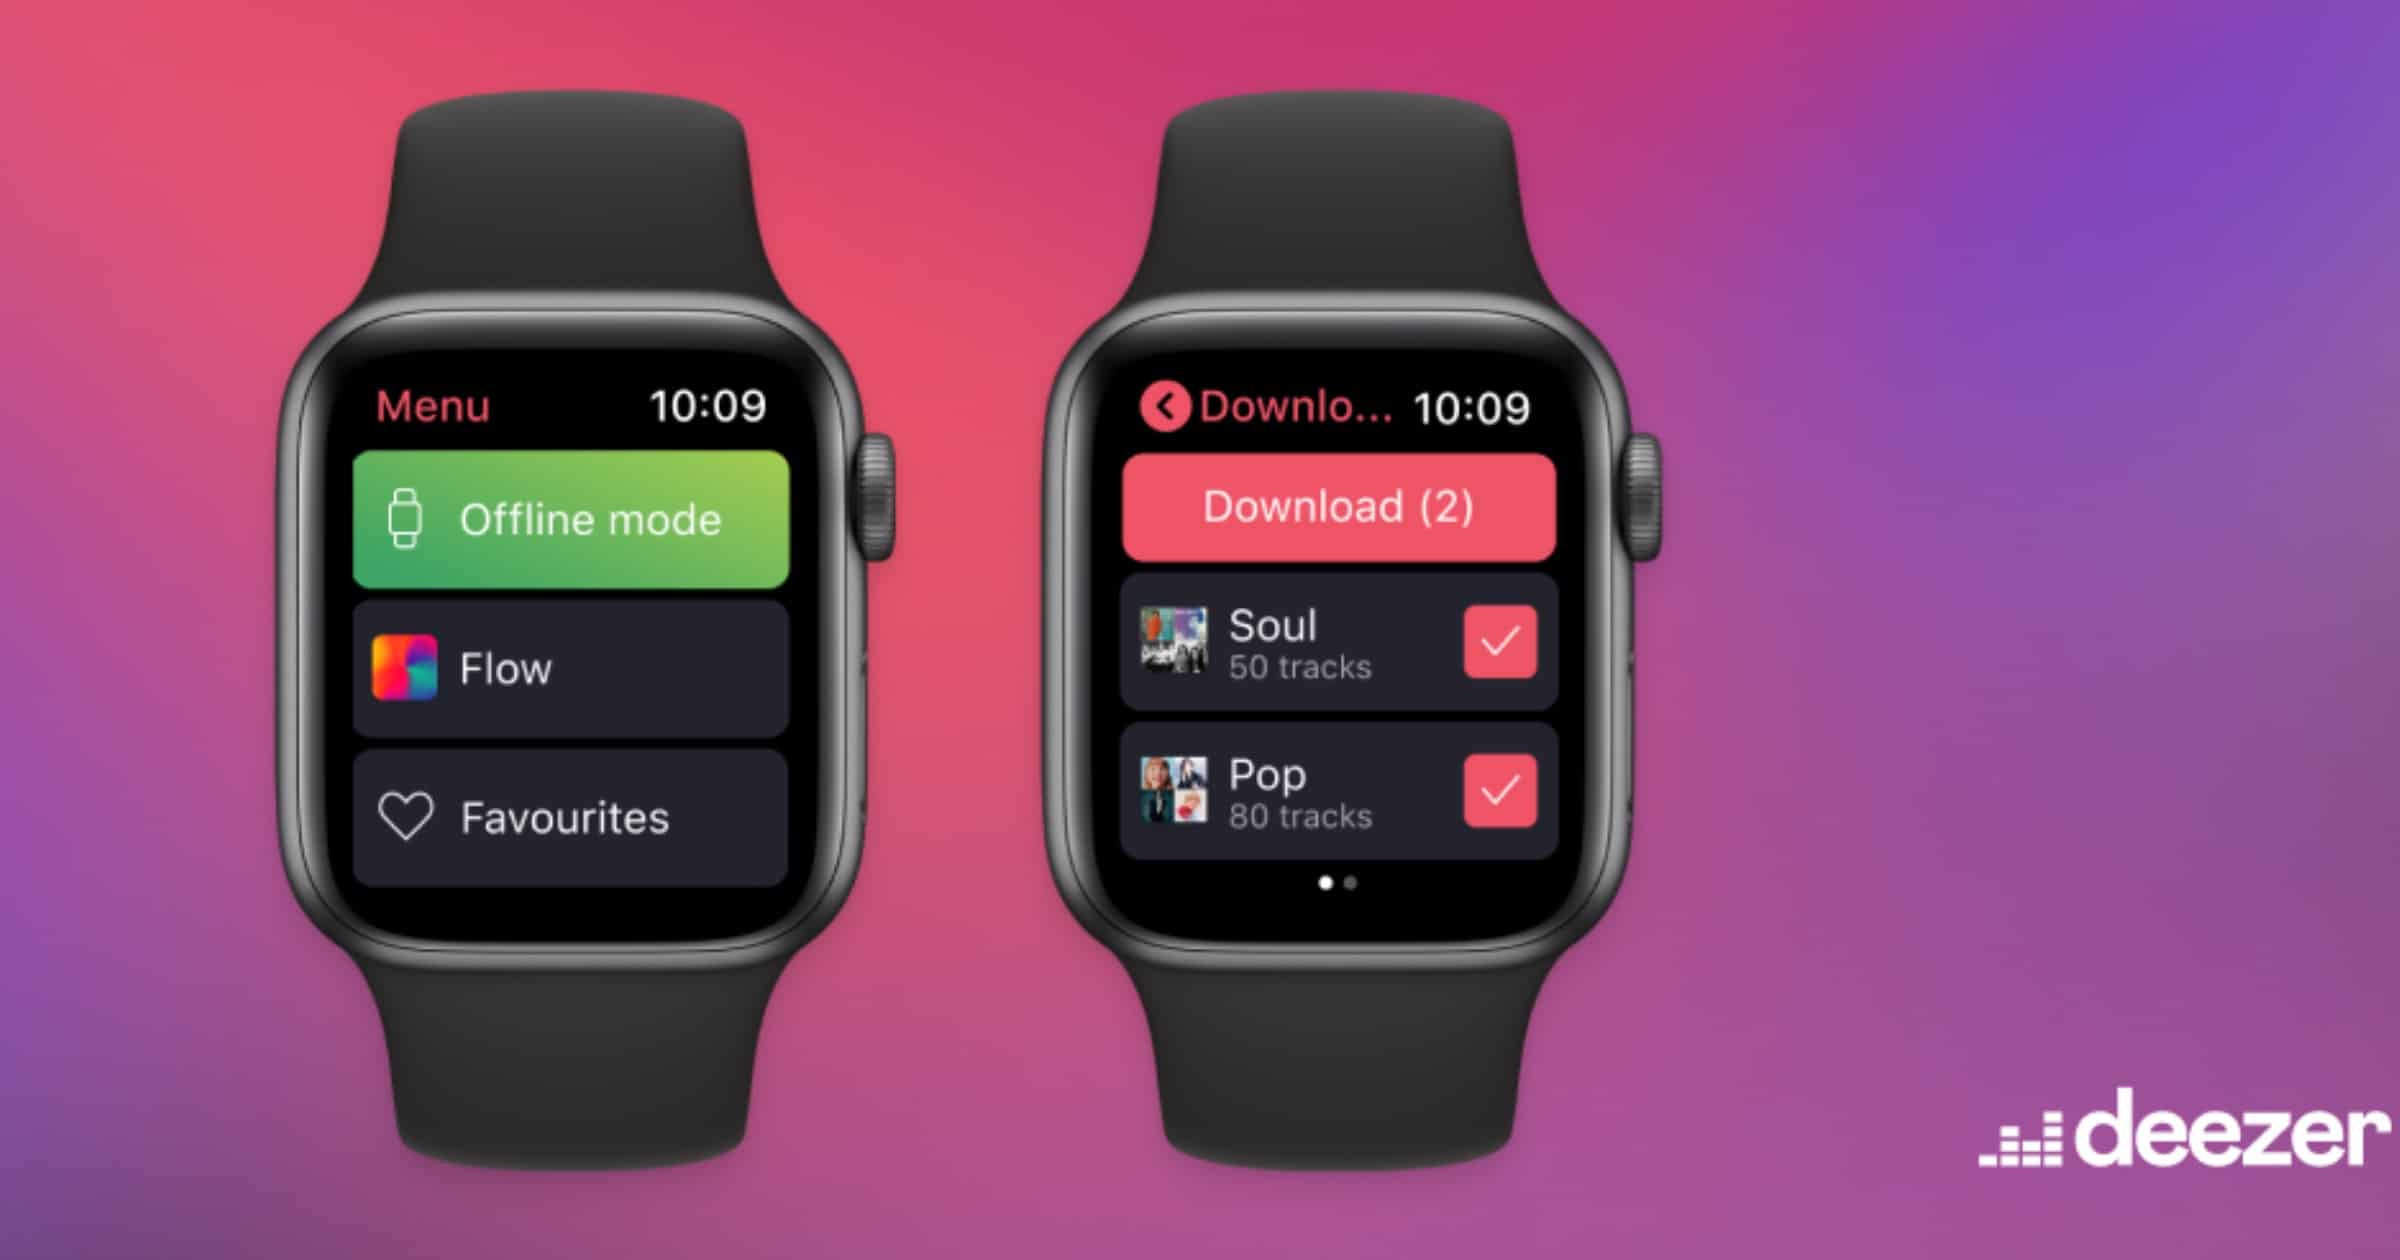 Deezer Now Allows Users to Manage Playlists and Listen Offline on Apple Watch